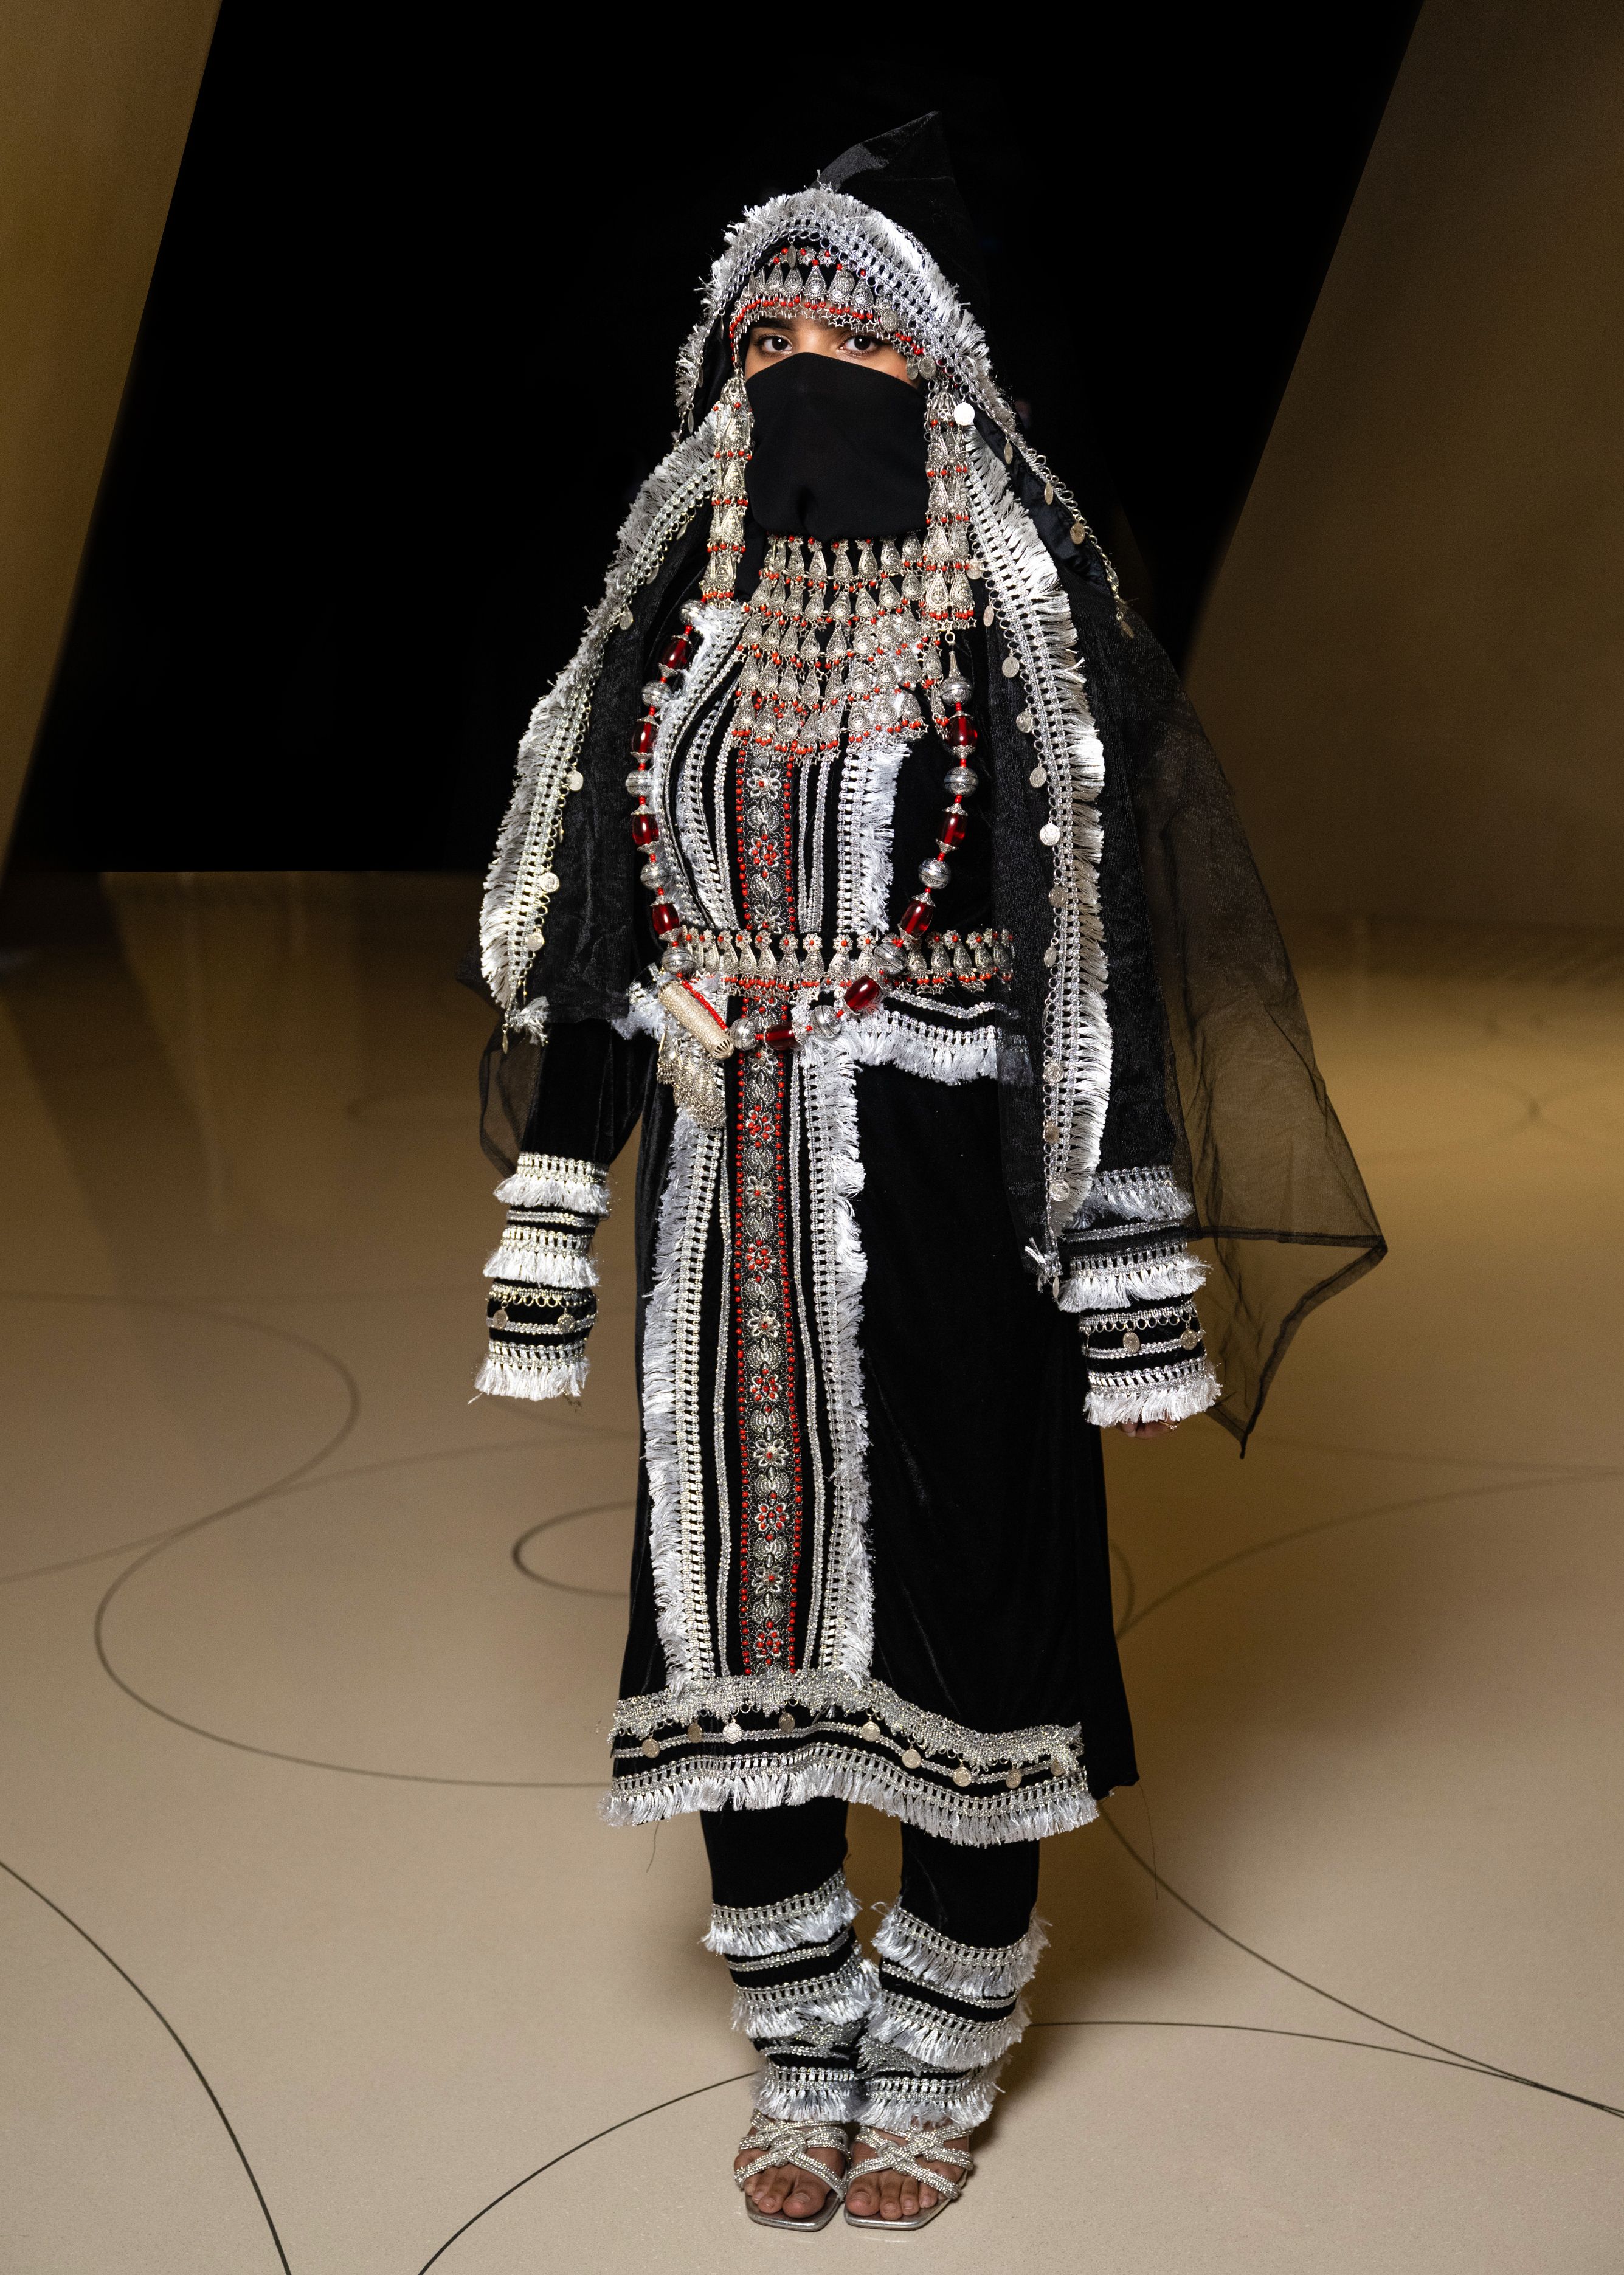 Woman models an embellished black velvet dress and silver embroidered trousers, face veil and head cover.